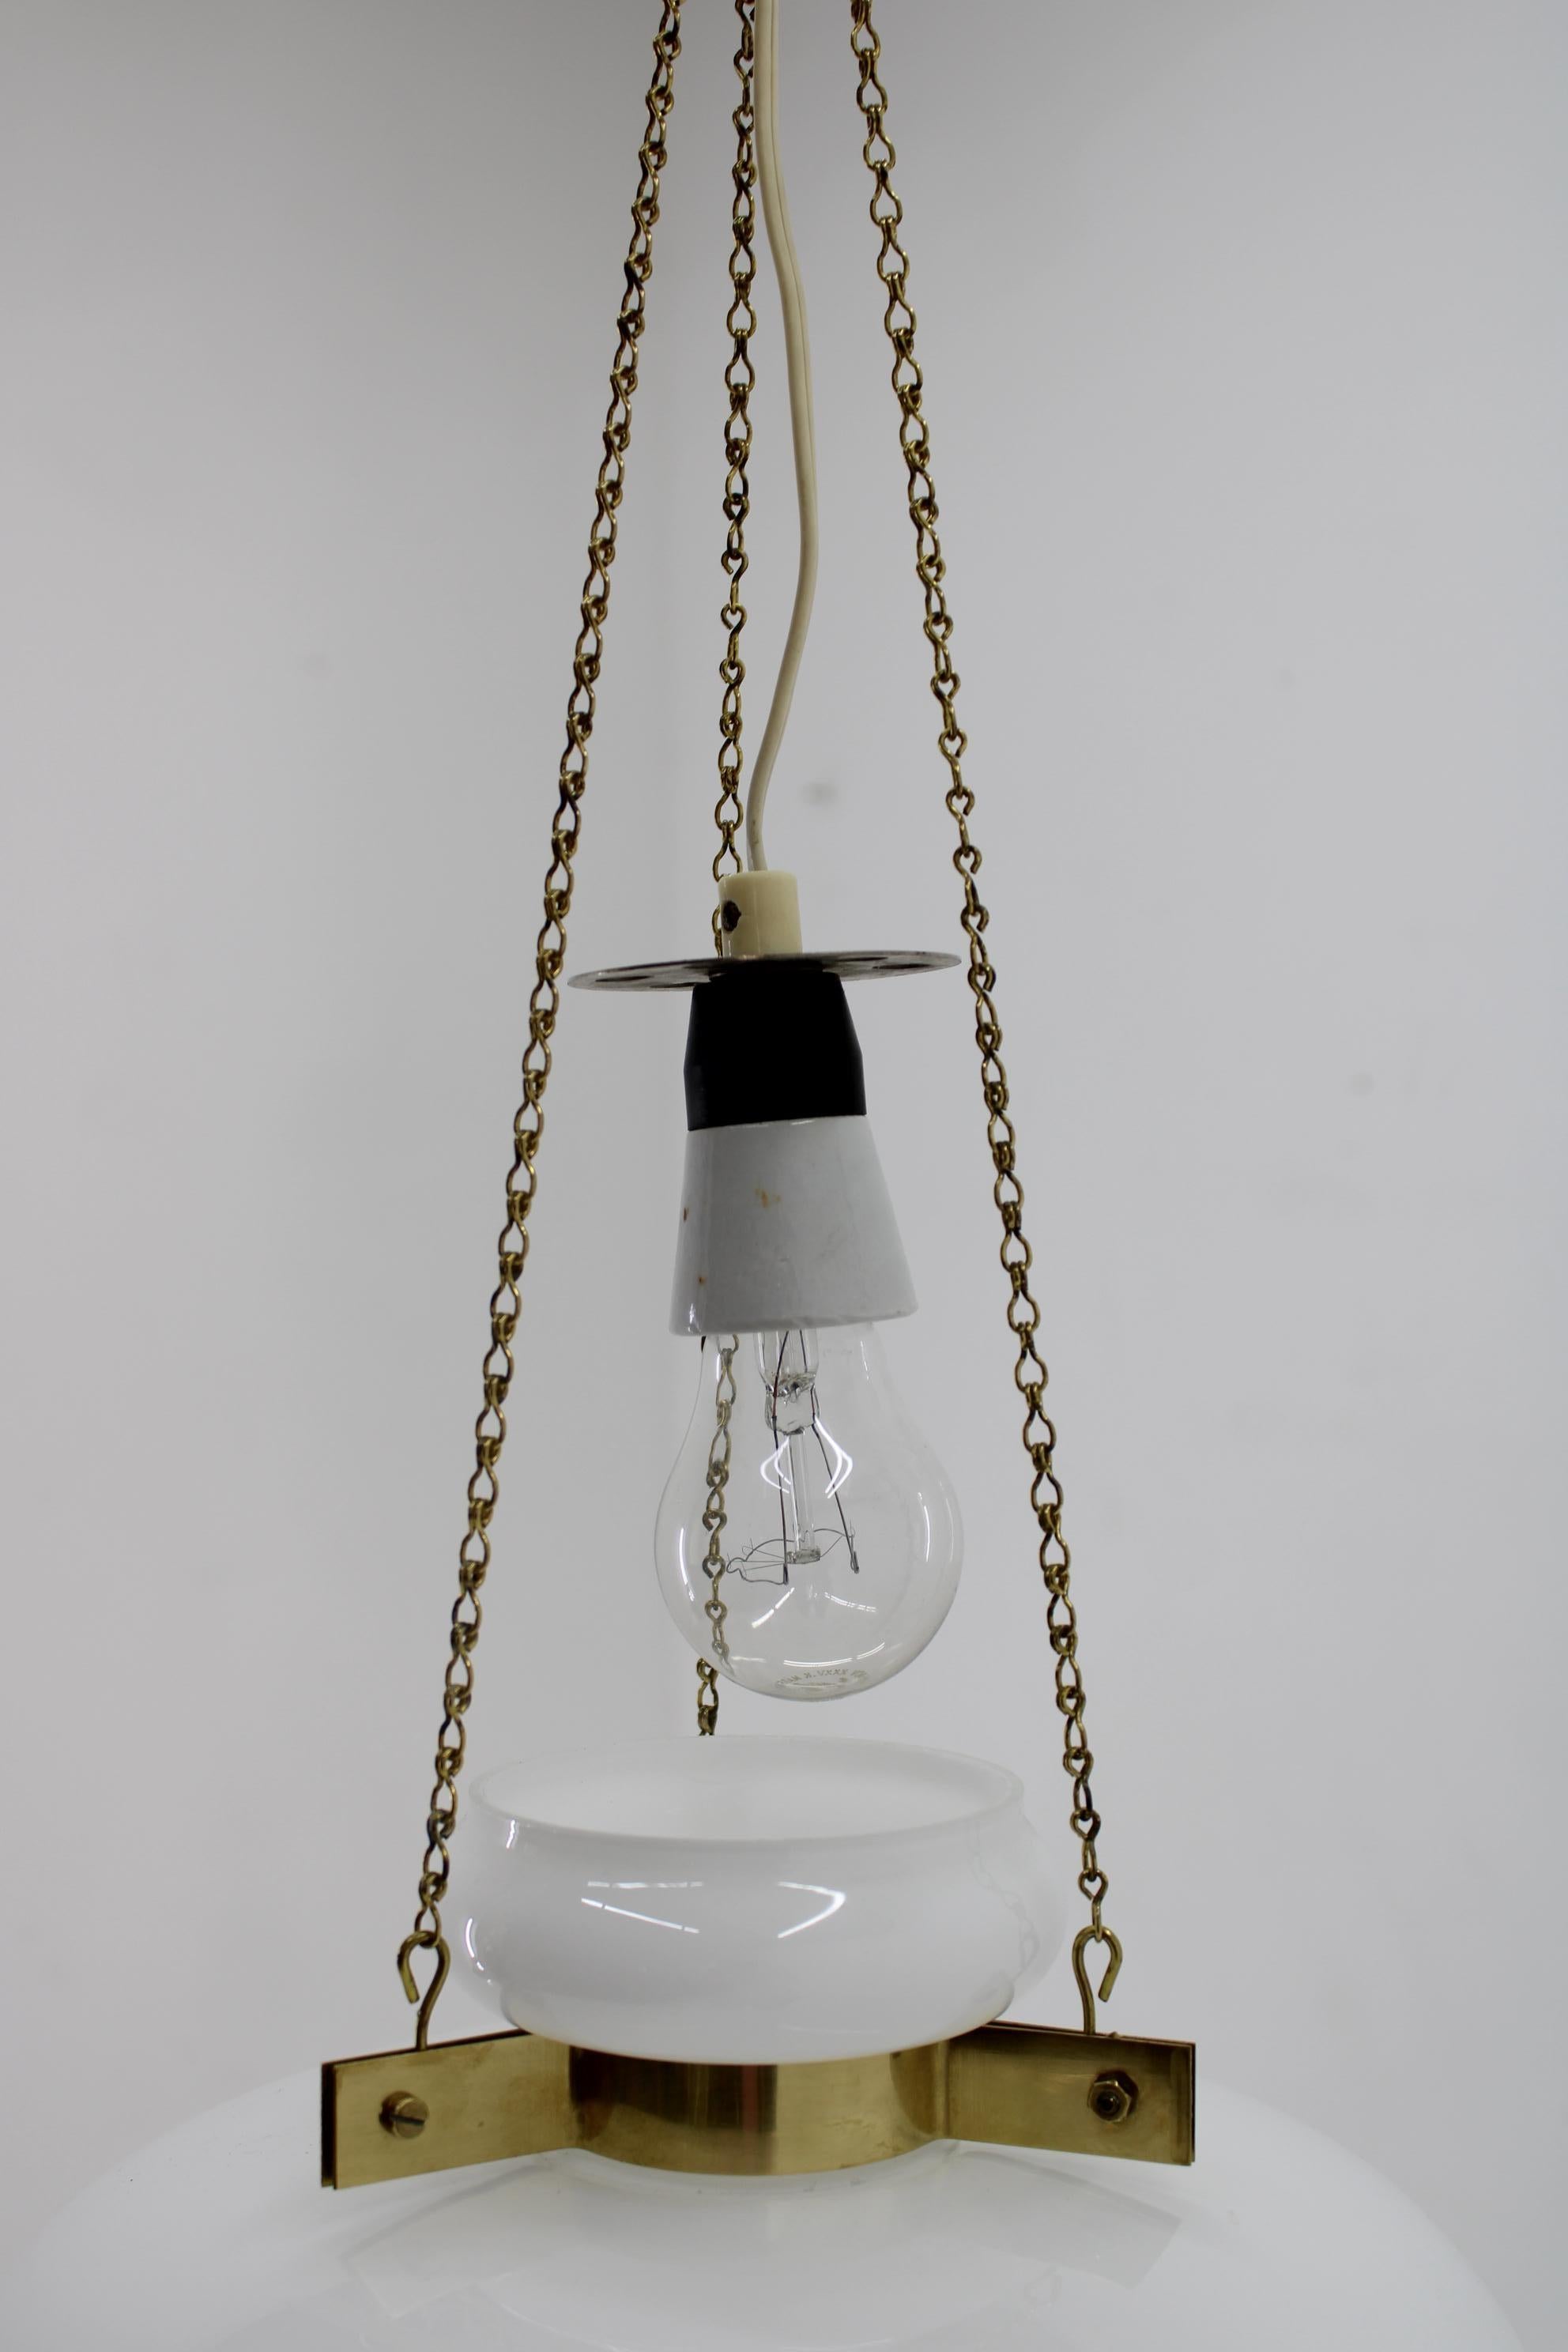 1970s Opaline Glass & Brass Pendant Light , 2 items available In Good Condition For Sale In Praha, CZ